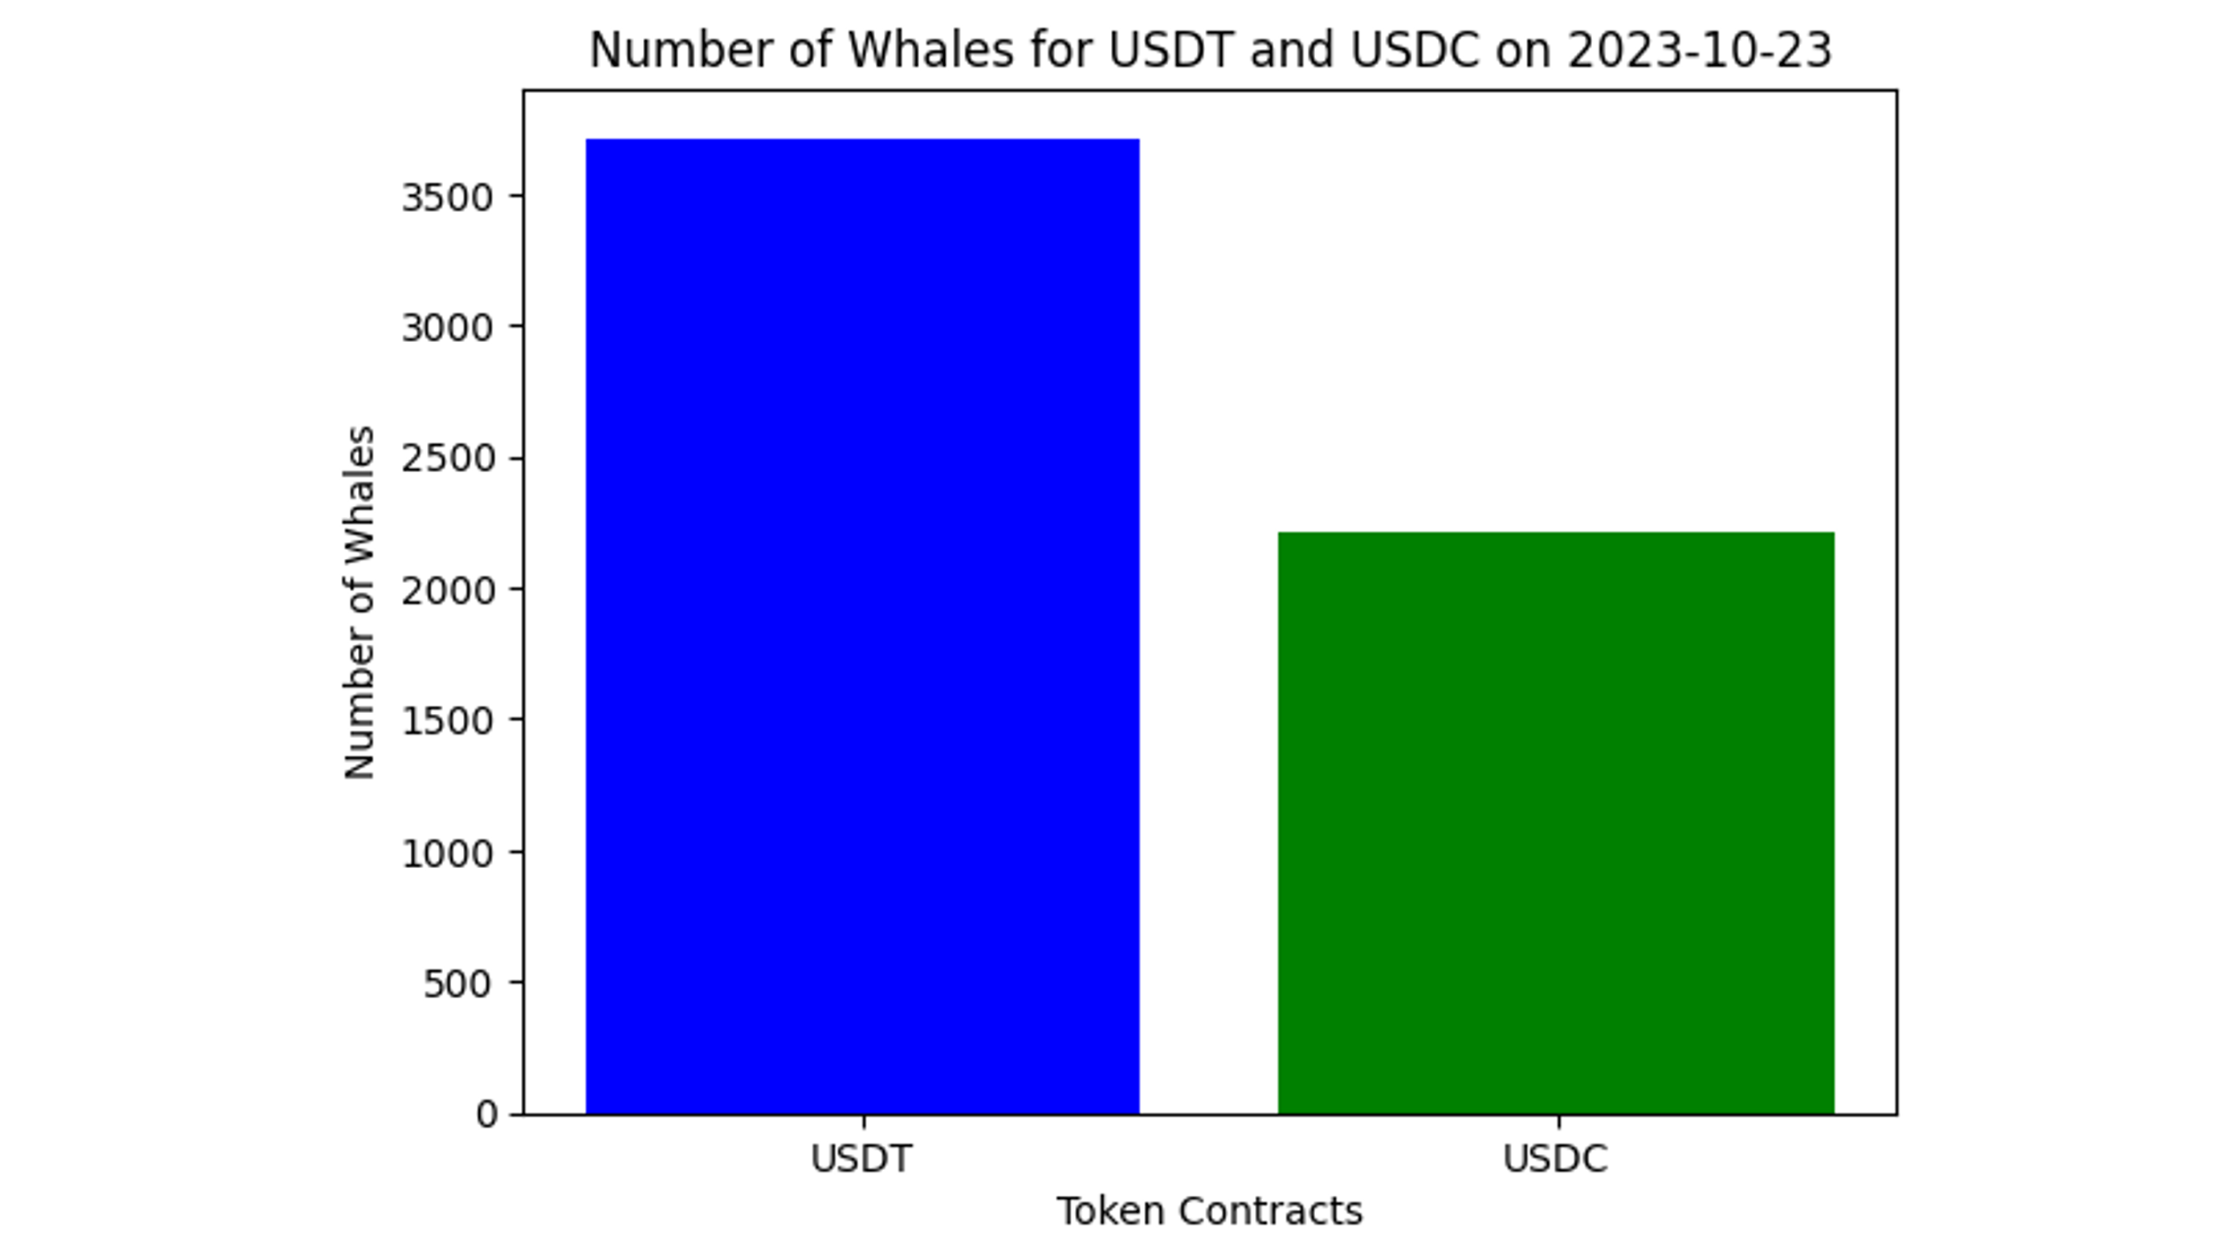 Graph for Number of USDC and USDT Whales on Oct 23, 2023